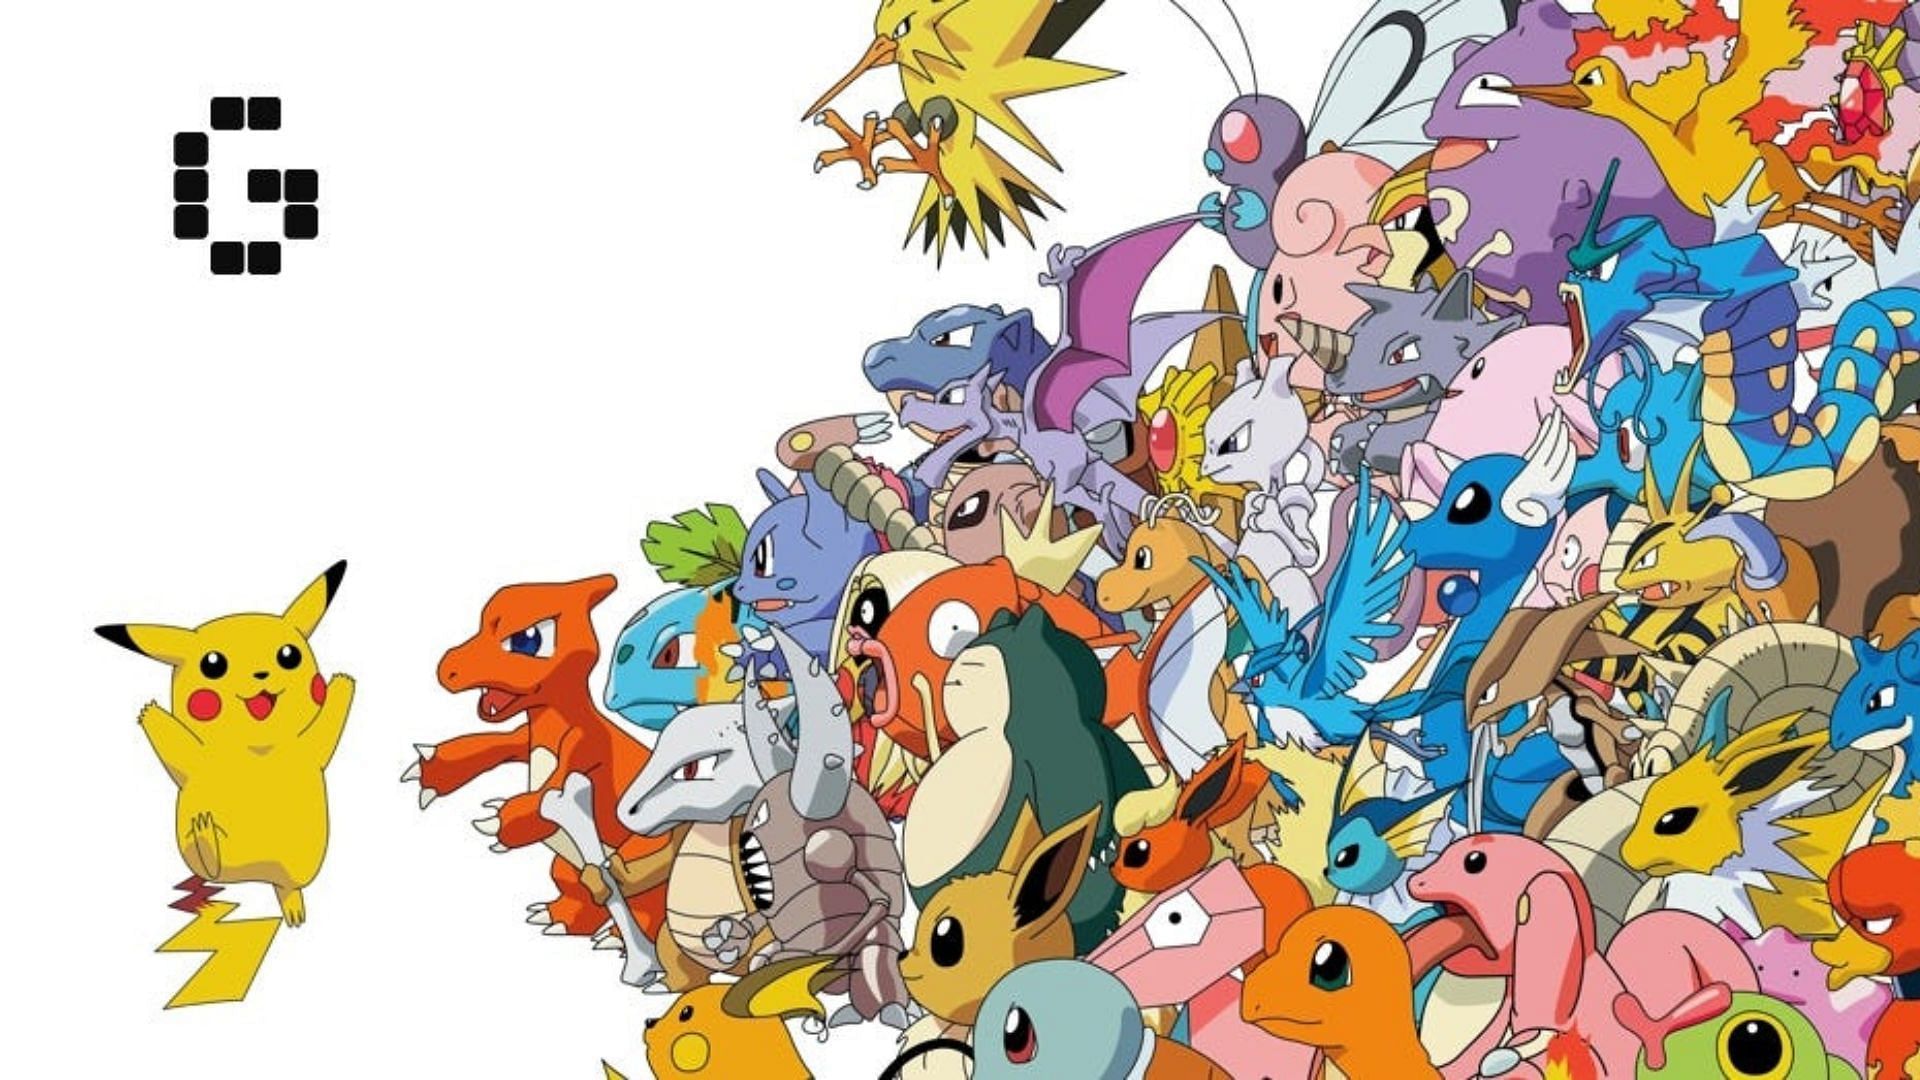 All Pokemon from the original 151 